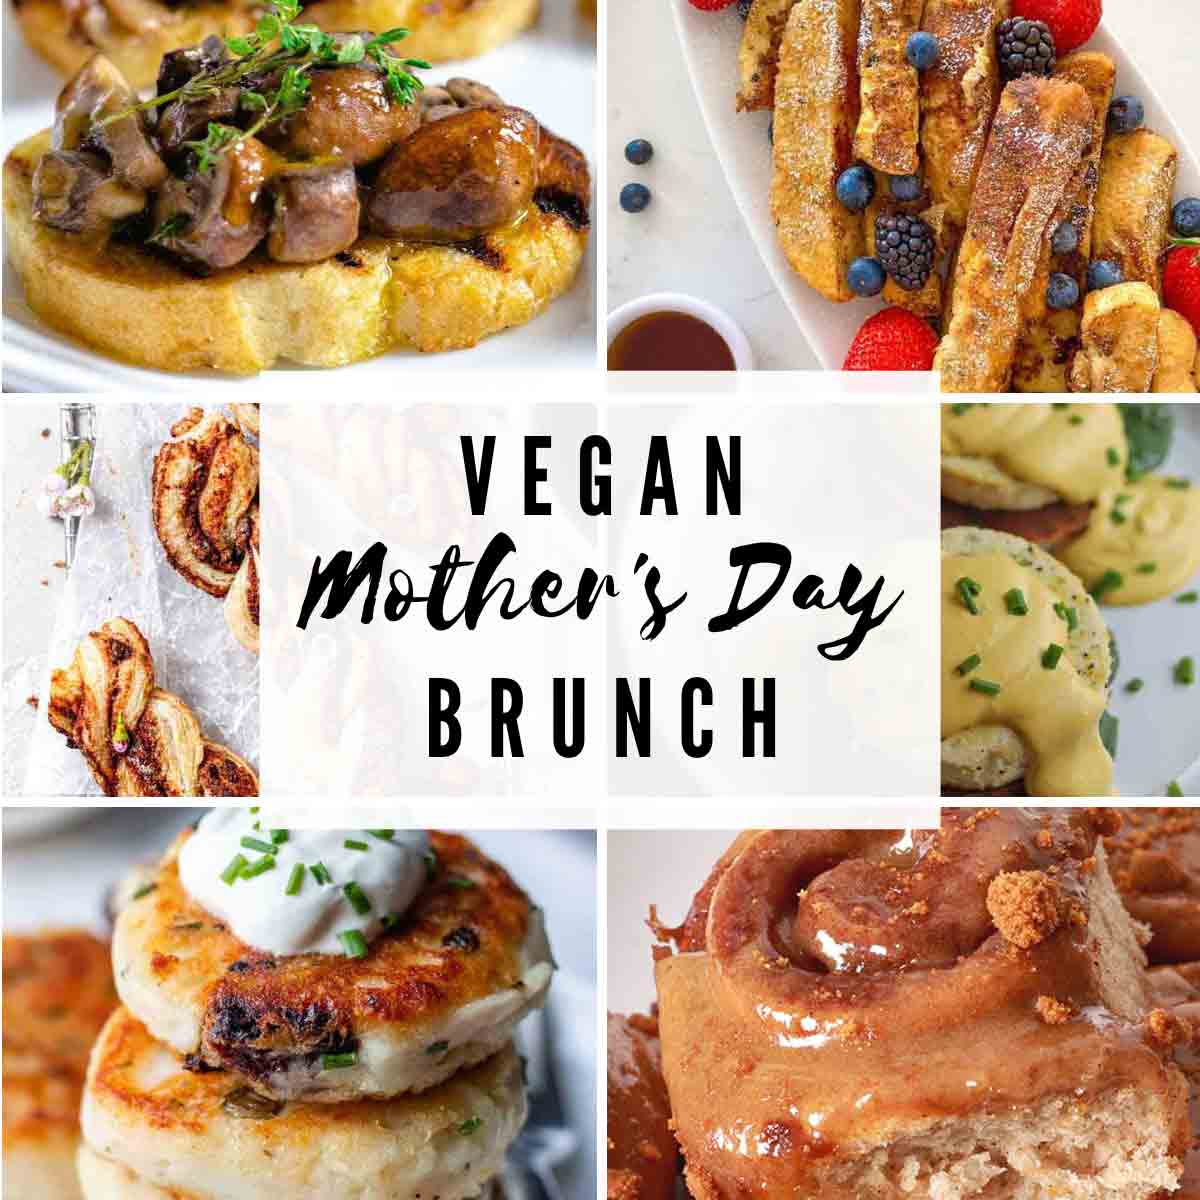 Sweet And Savoury Food Image Collage With Text Overlay That Reads 'vegan Mothers Day Brunch'